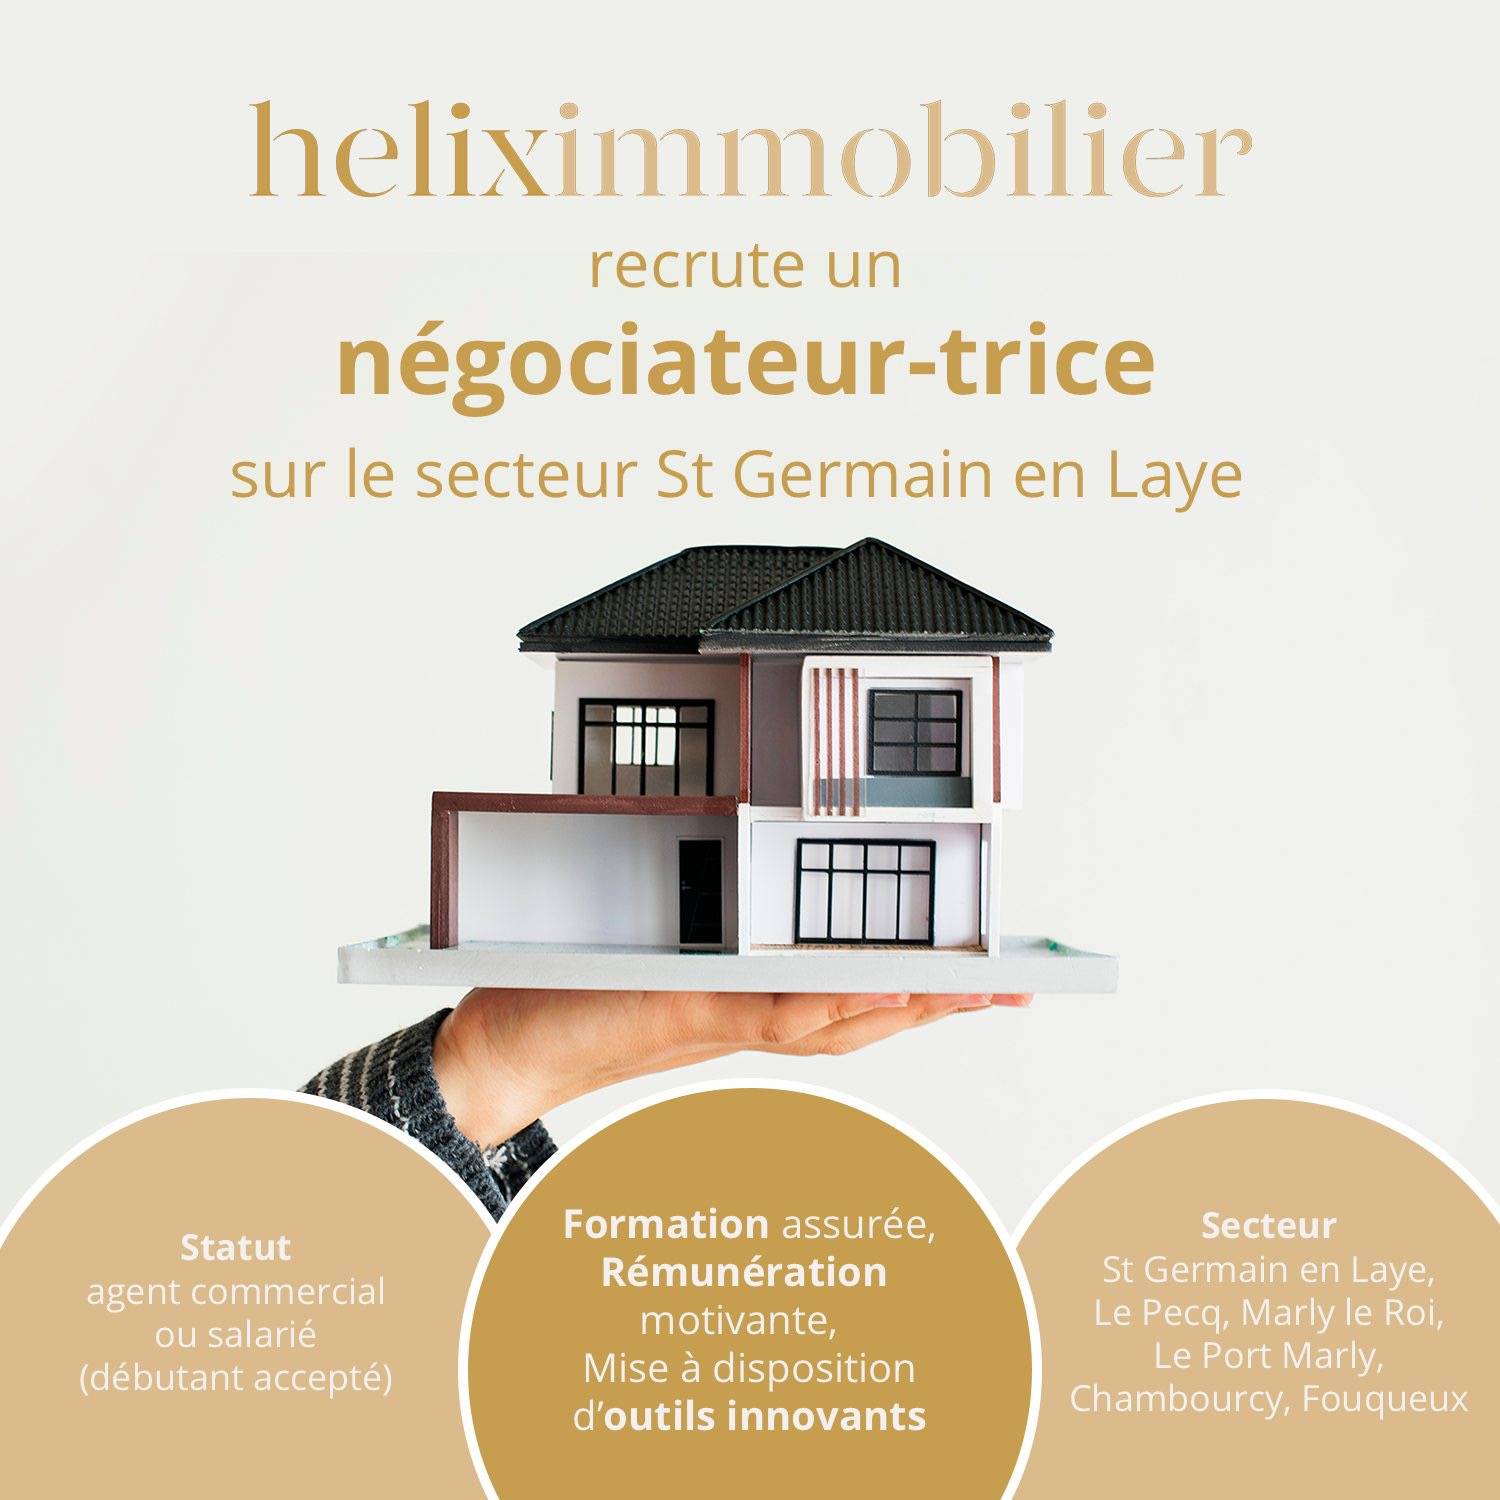 hELIX iMMOBILIER RECRUTE